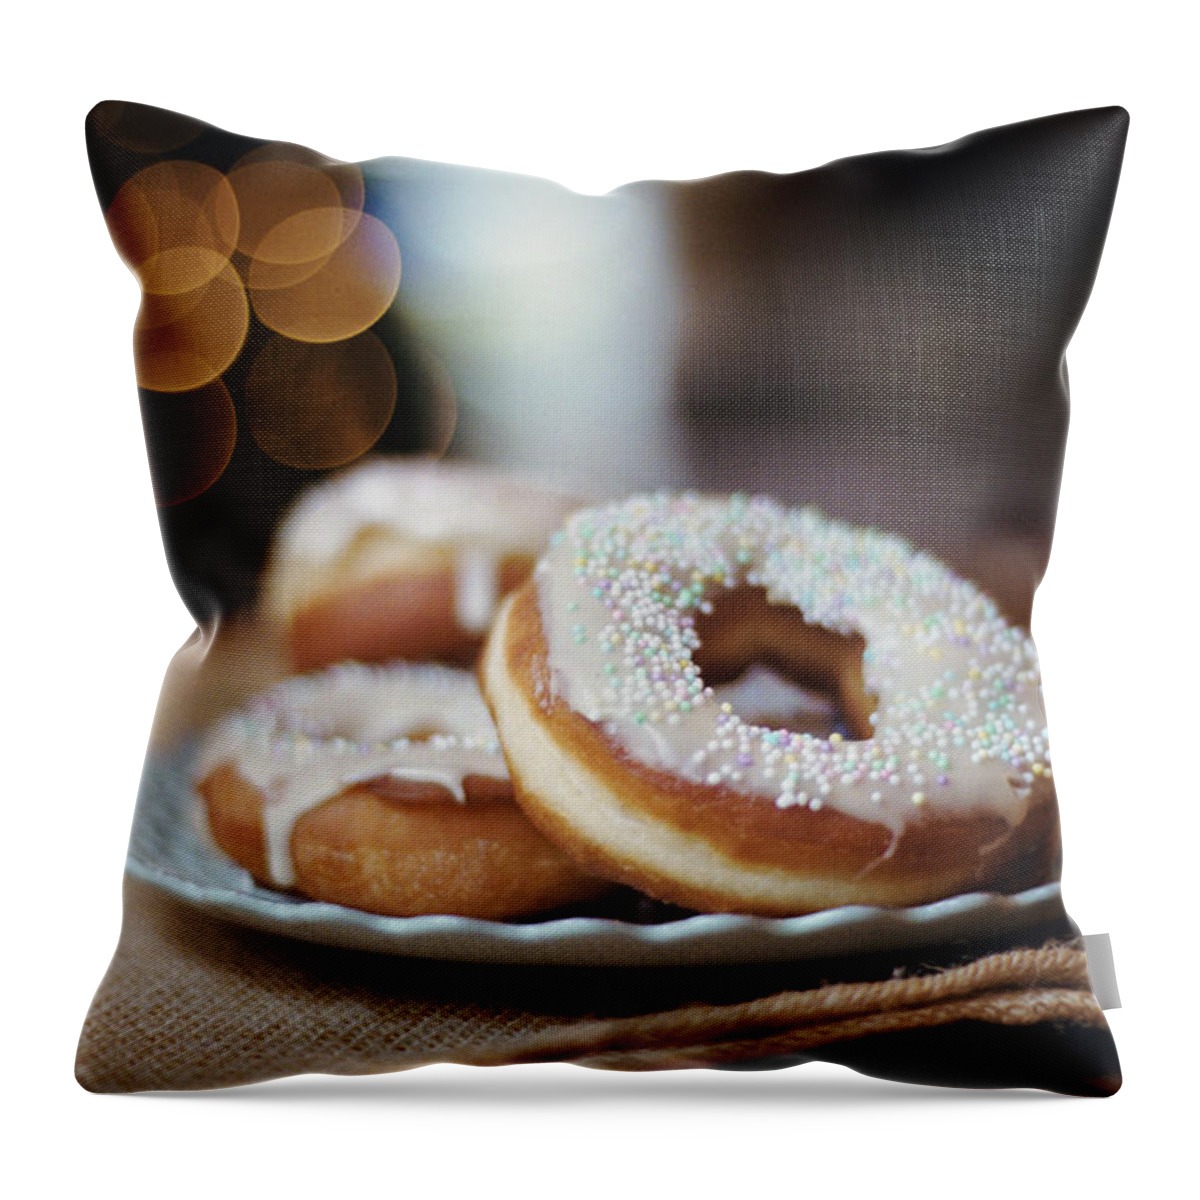 Celebration Throw Pillow featuring the photograph Frosted Donuts And Christmas Tree by Danielle D. Hughson